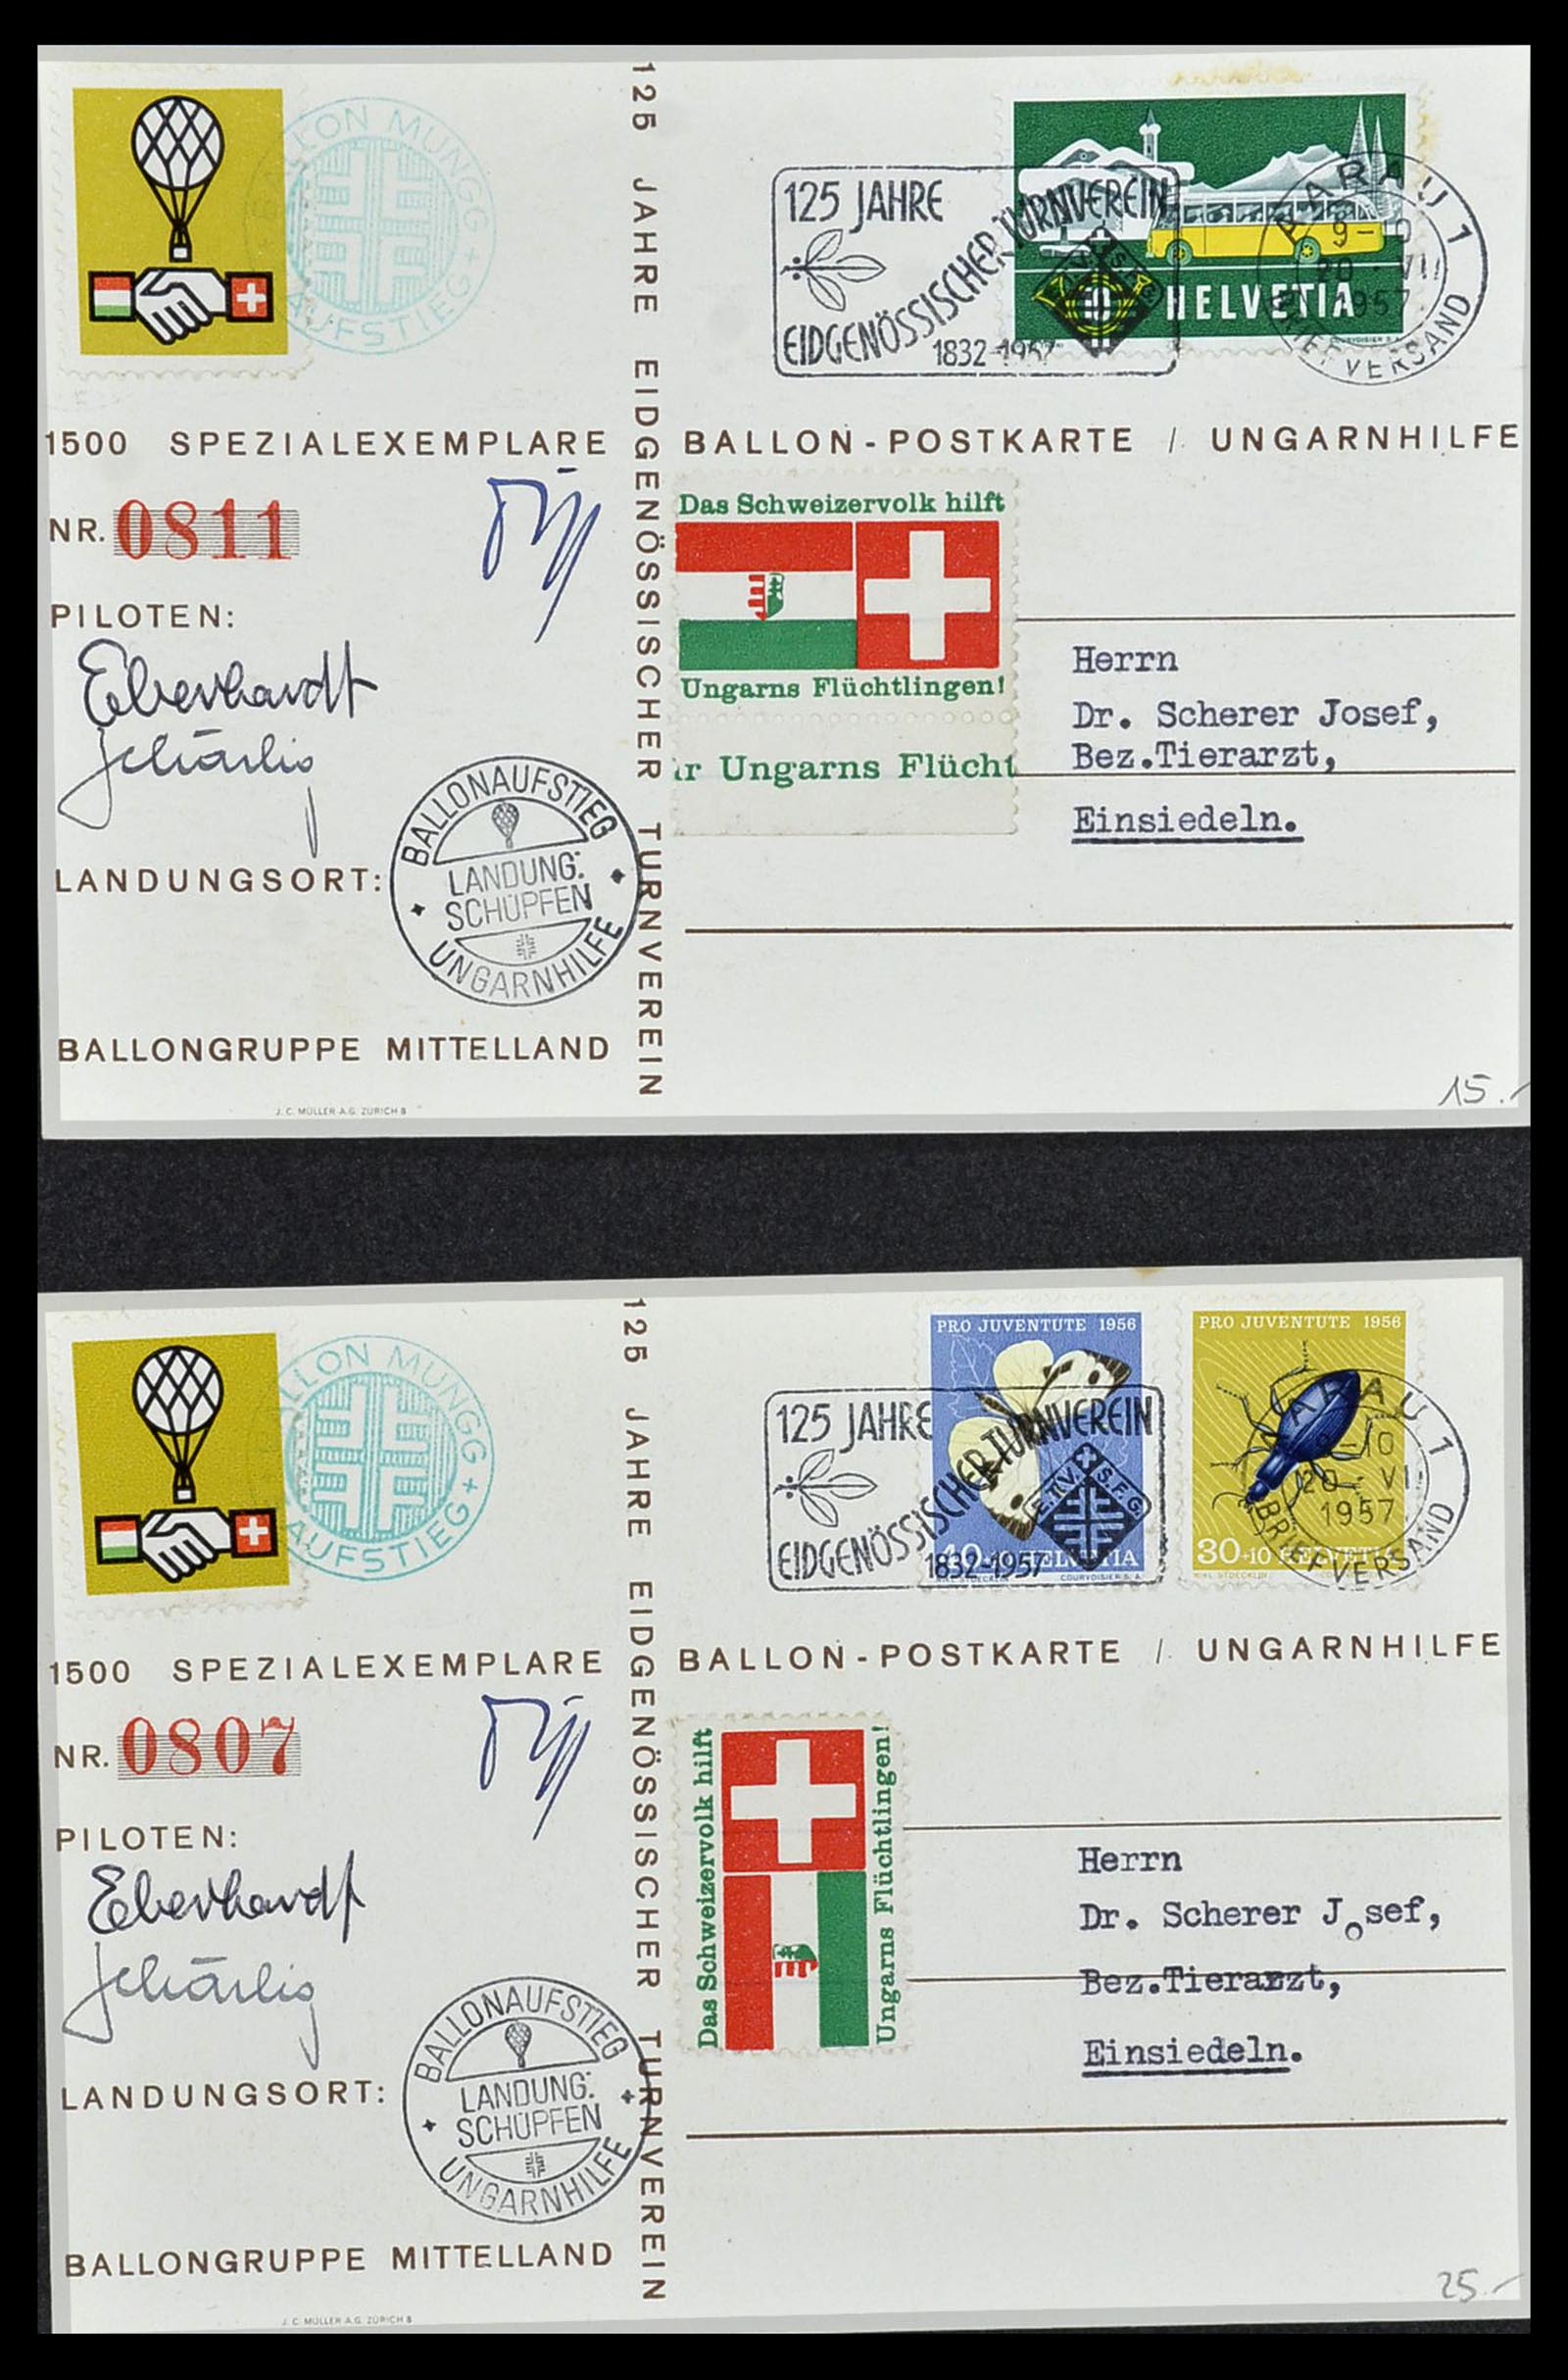 34141 059 - Stamp collection 34141 Switzerland airmail covers 1920-1960.